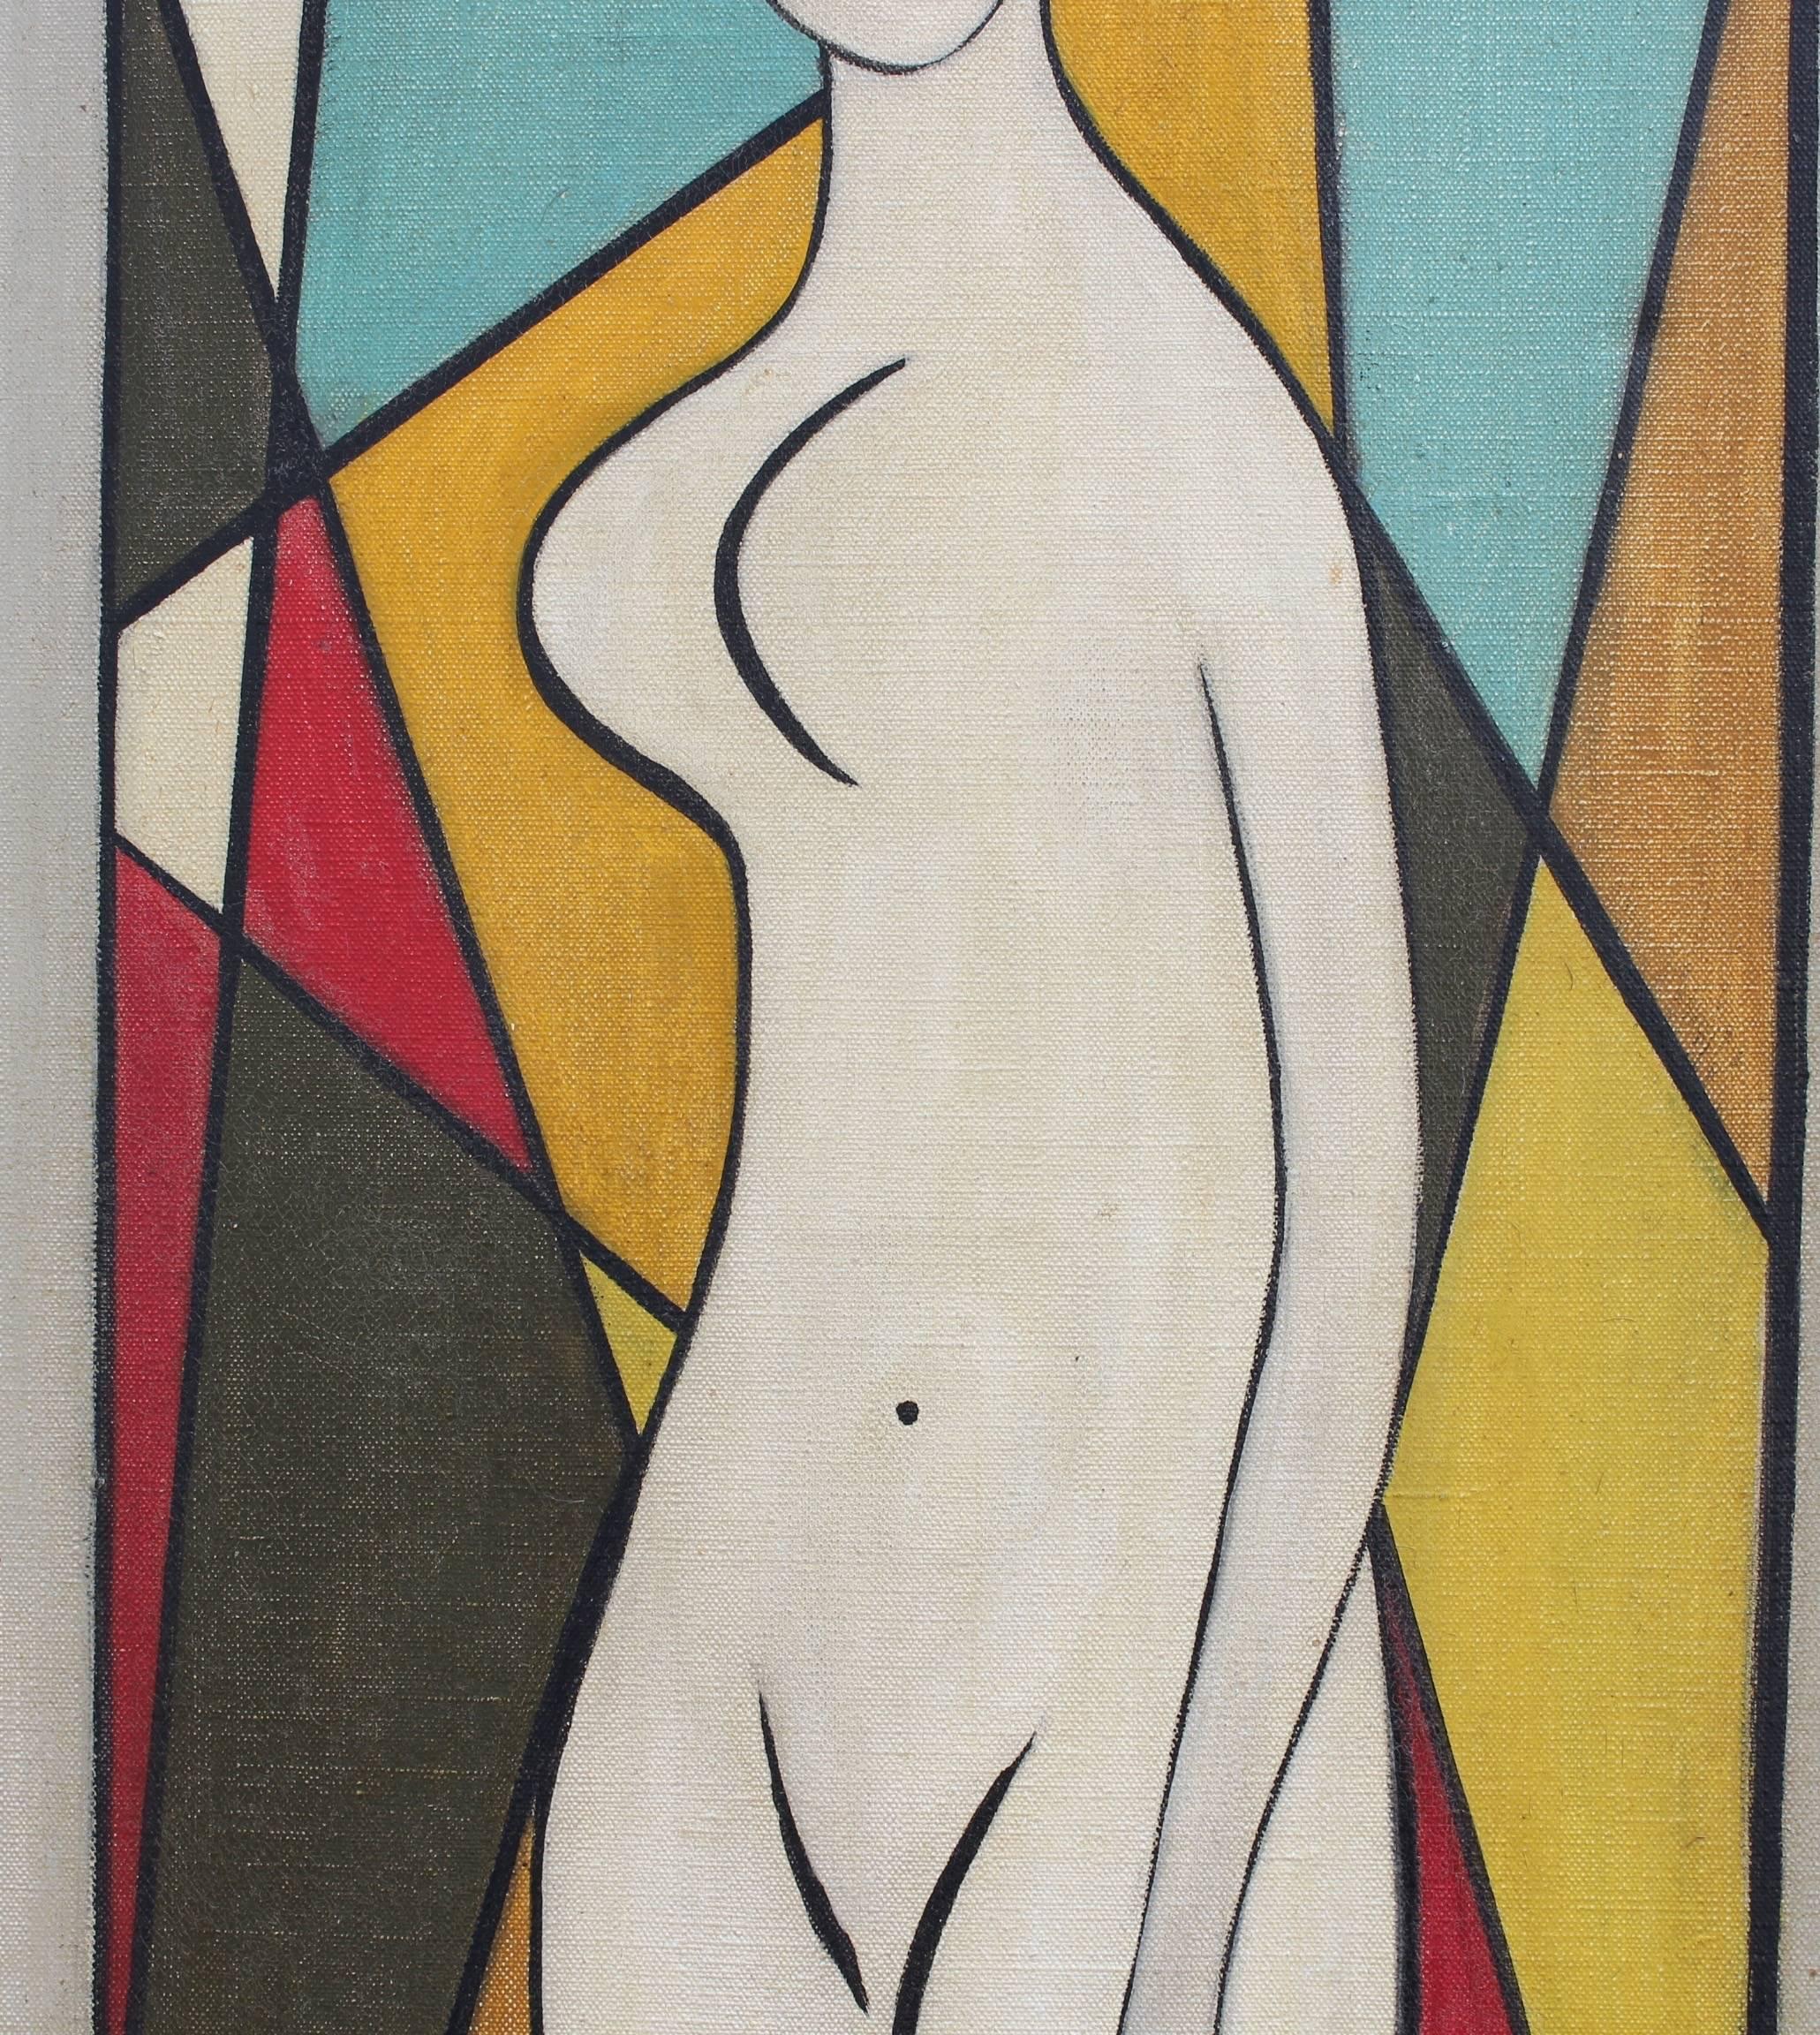 'Standing Nude', oil on canvas (circa 1960s), by Edgar Stoëbel (1909 - 2001). In his inimitable style, artist Stoëbel's image of a standing woman is a lively and colourful modernist work. The image has a pop art quality to it and was created just as